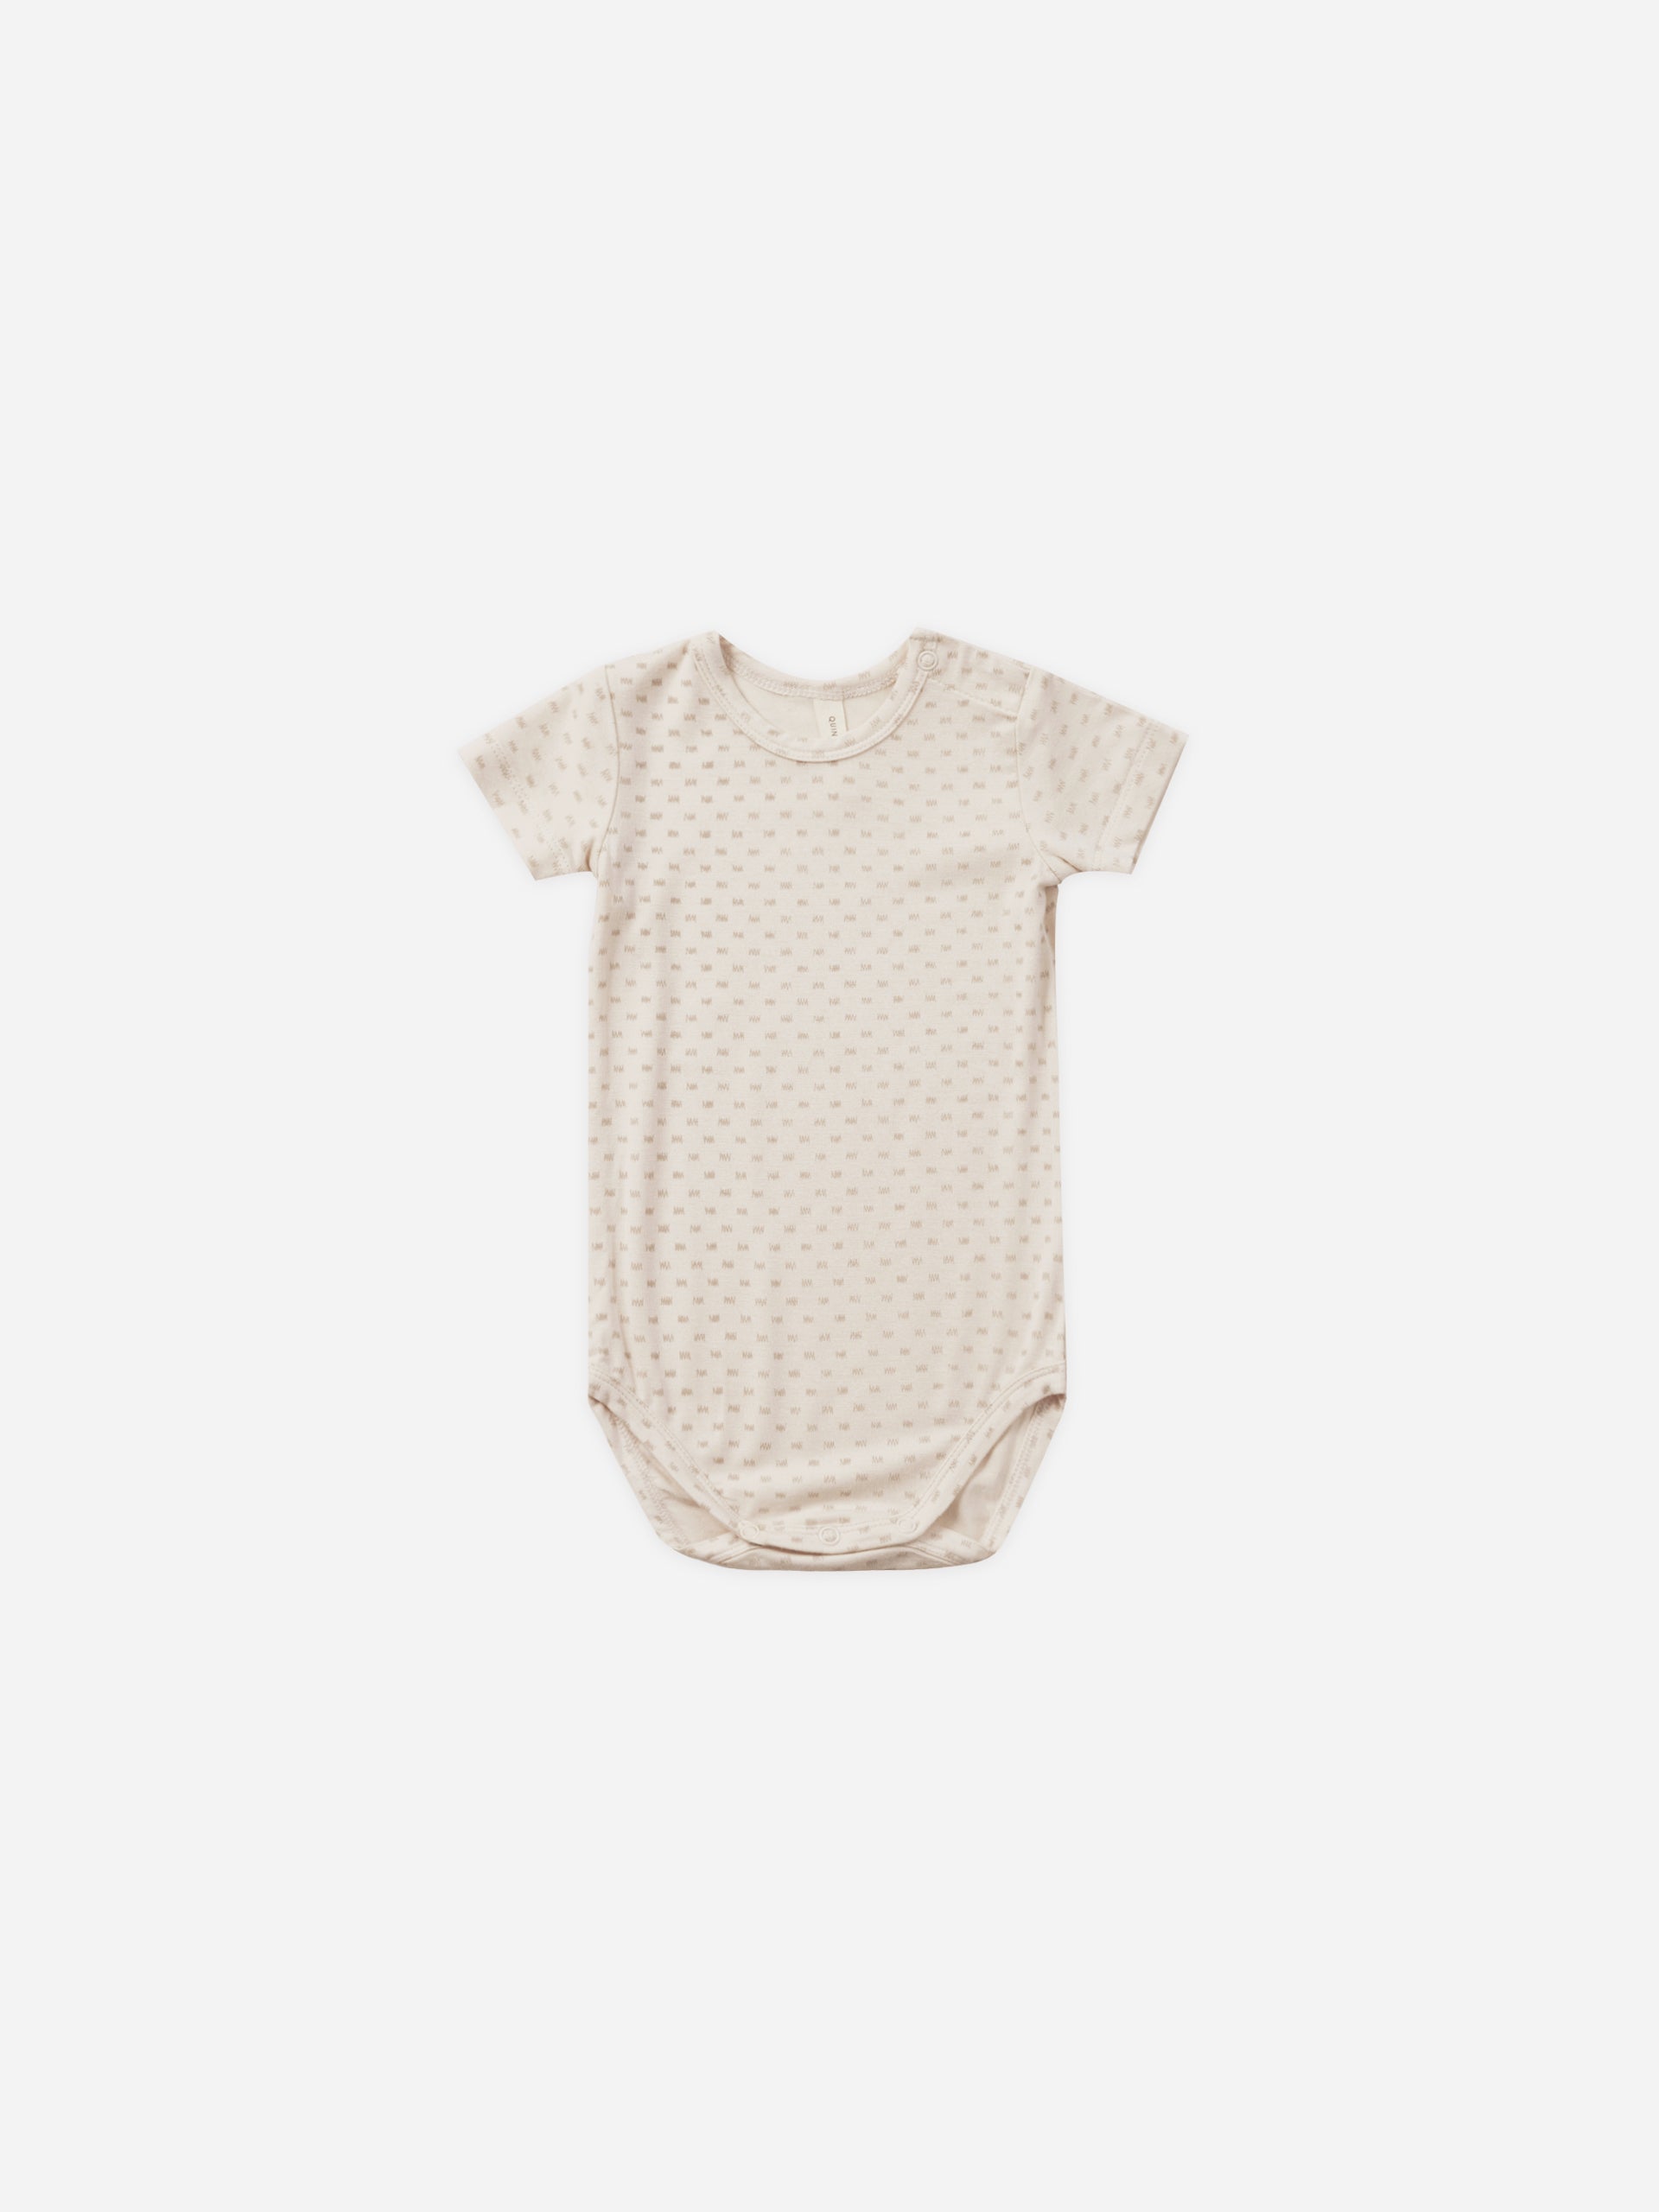 Bamboo Short Sleeve Bodysuit || Oat Check - Rylee + Cru | Kids Clothes | Trendy Baby Clothes | Modern Infant Outfits |